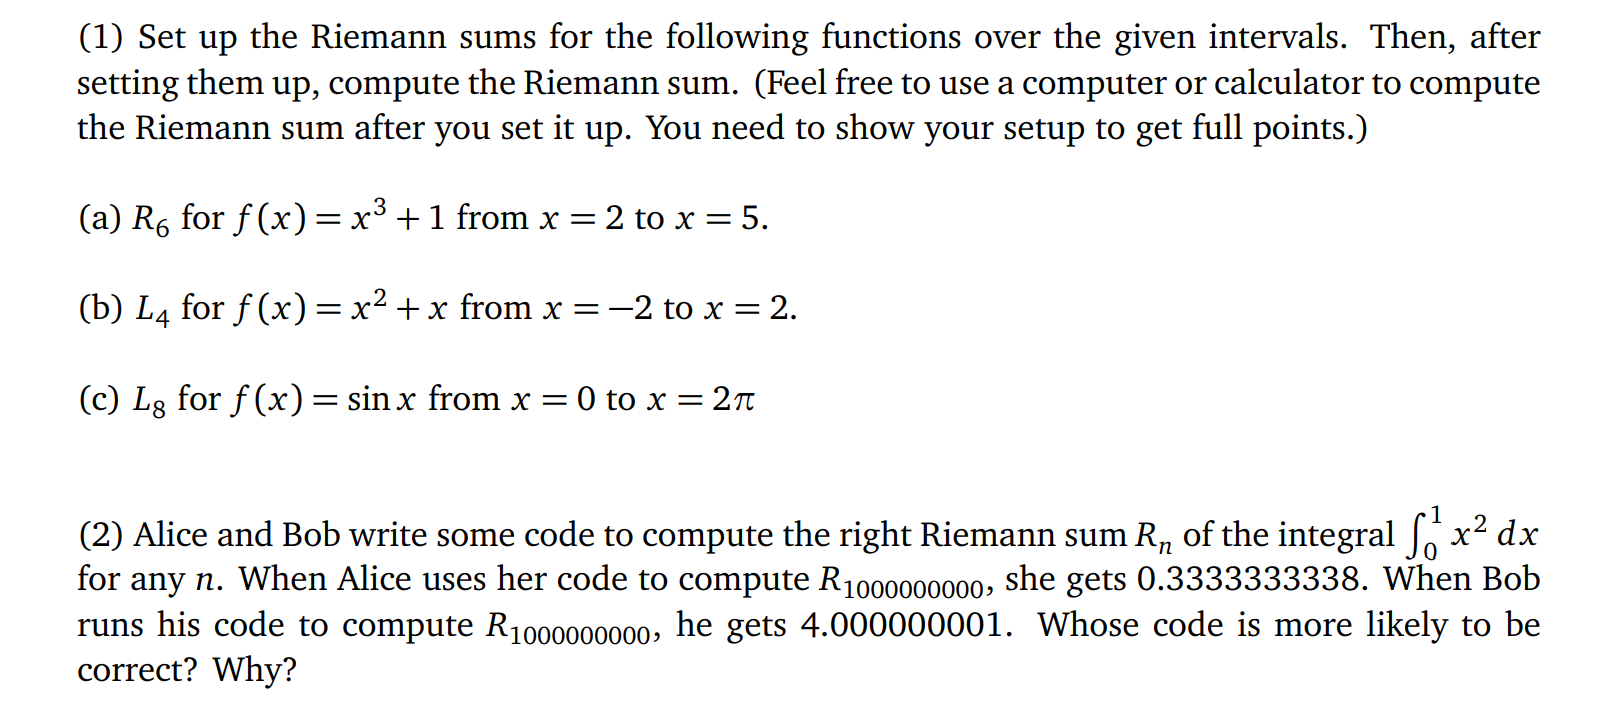 (1) Set up the Riemann sums for the following functions over the given intervals. Then, after setting them up, compute the Ri